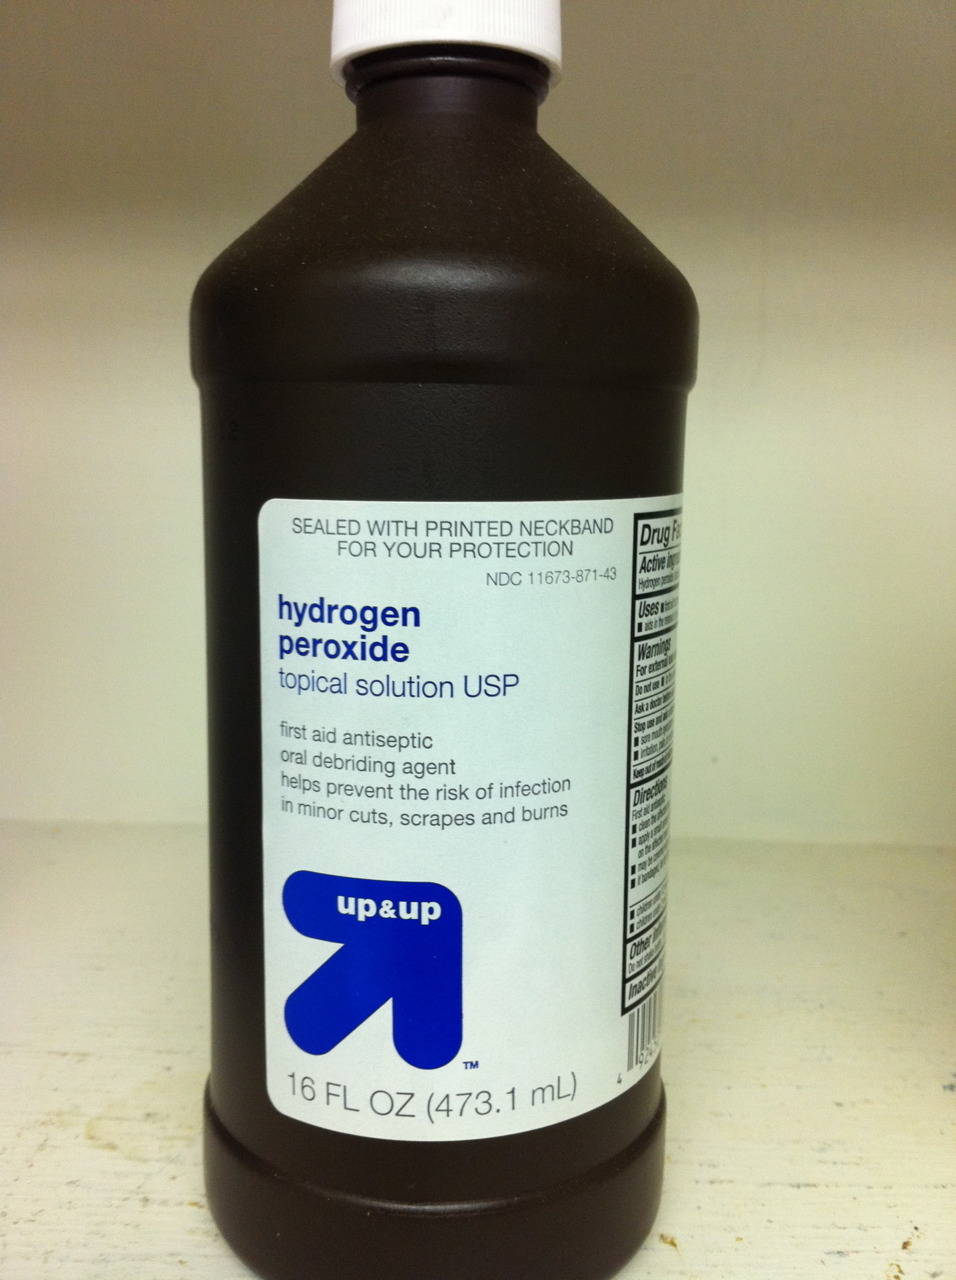 thedavecanread:
“ ladypagemaster7:
“ renee-ole:
“ hamburgerjack:
“ the-chosen-juan:
“ fuckyeahmakestuff:
“ Oh, Hydrogen Peroxide. You do so many things. You deserve more attention.
Here’s a list of the many benefits of Hydrogen Peroxide!
1. Take one...